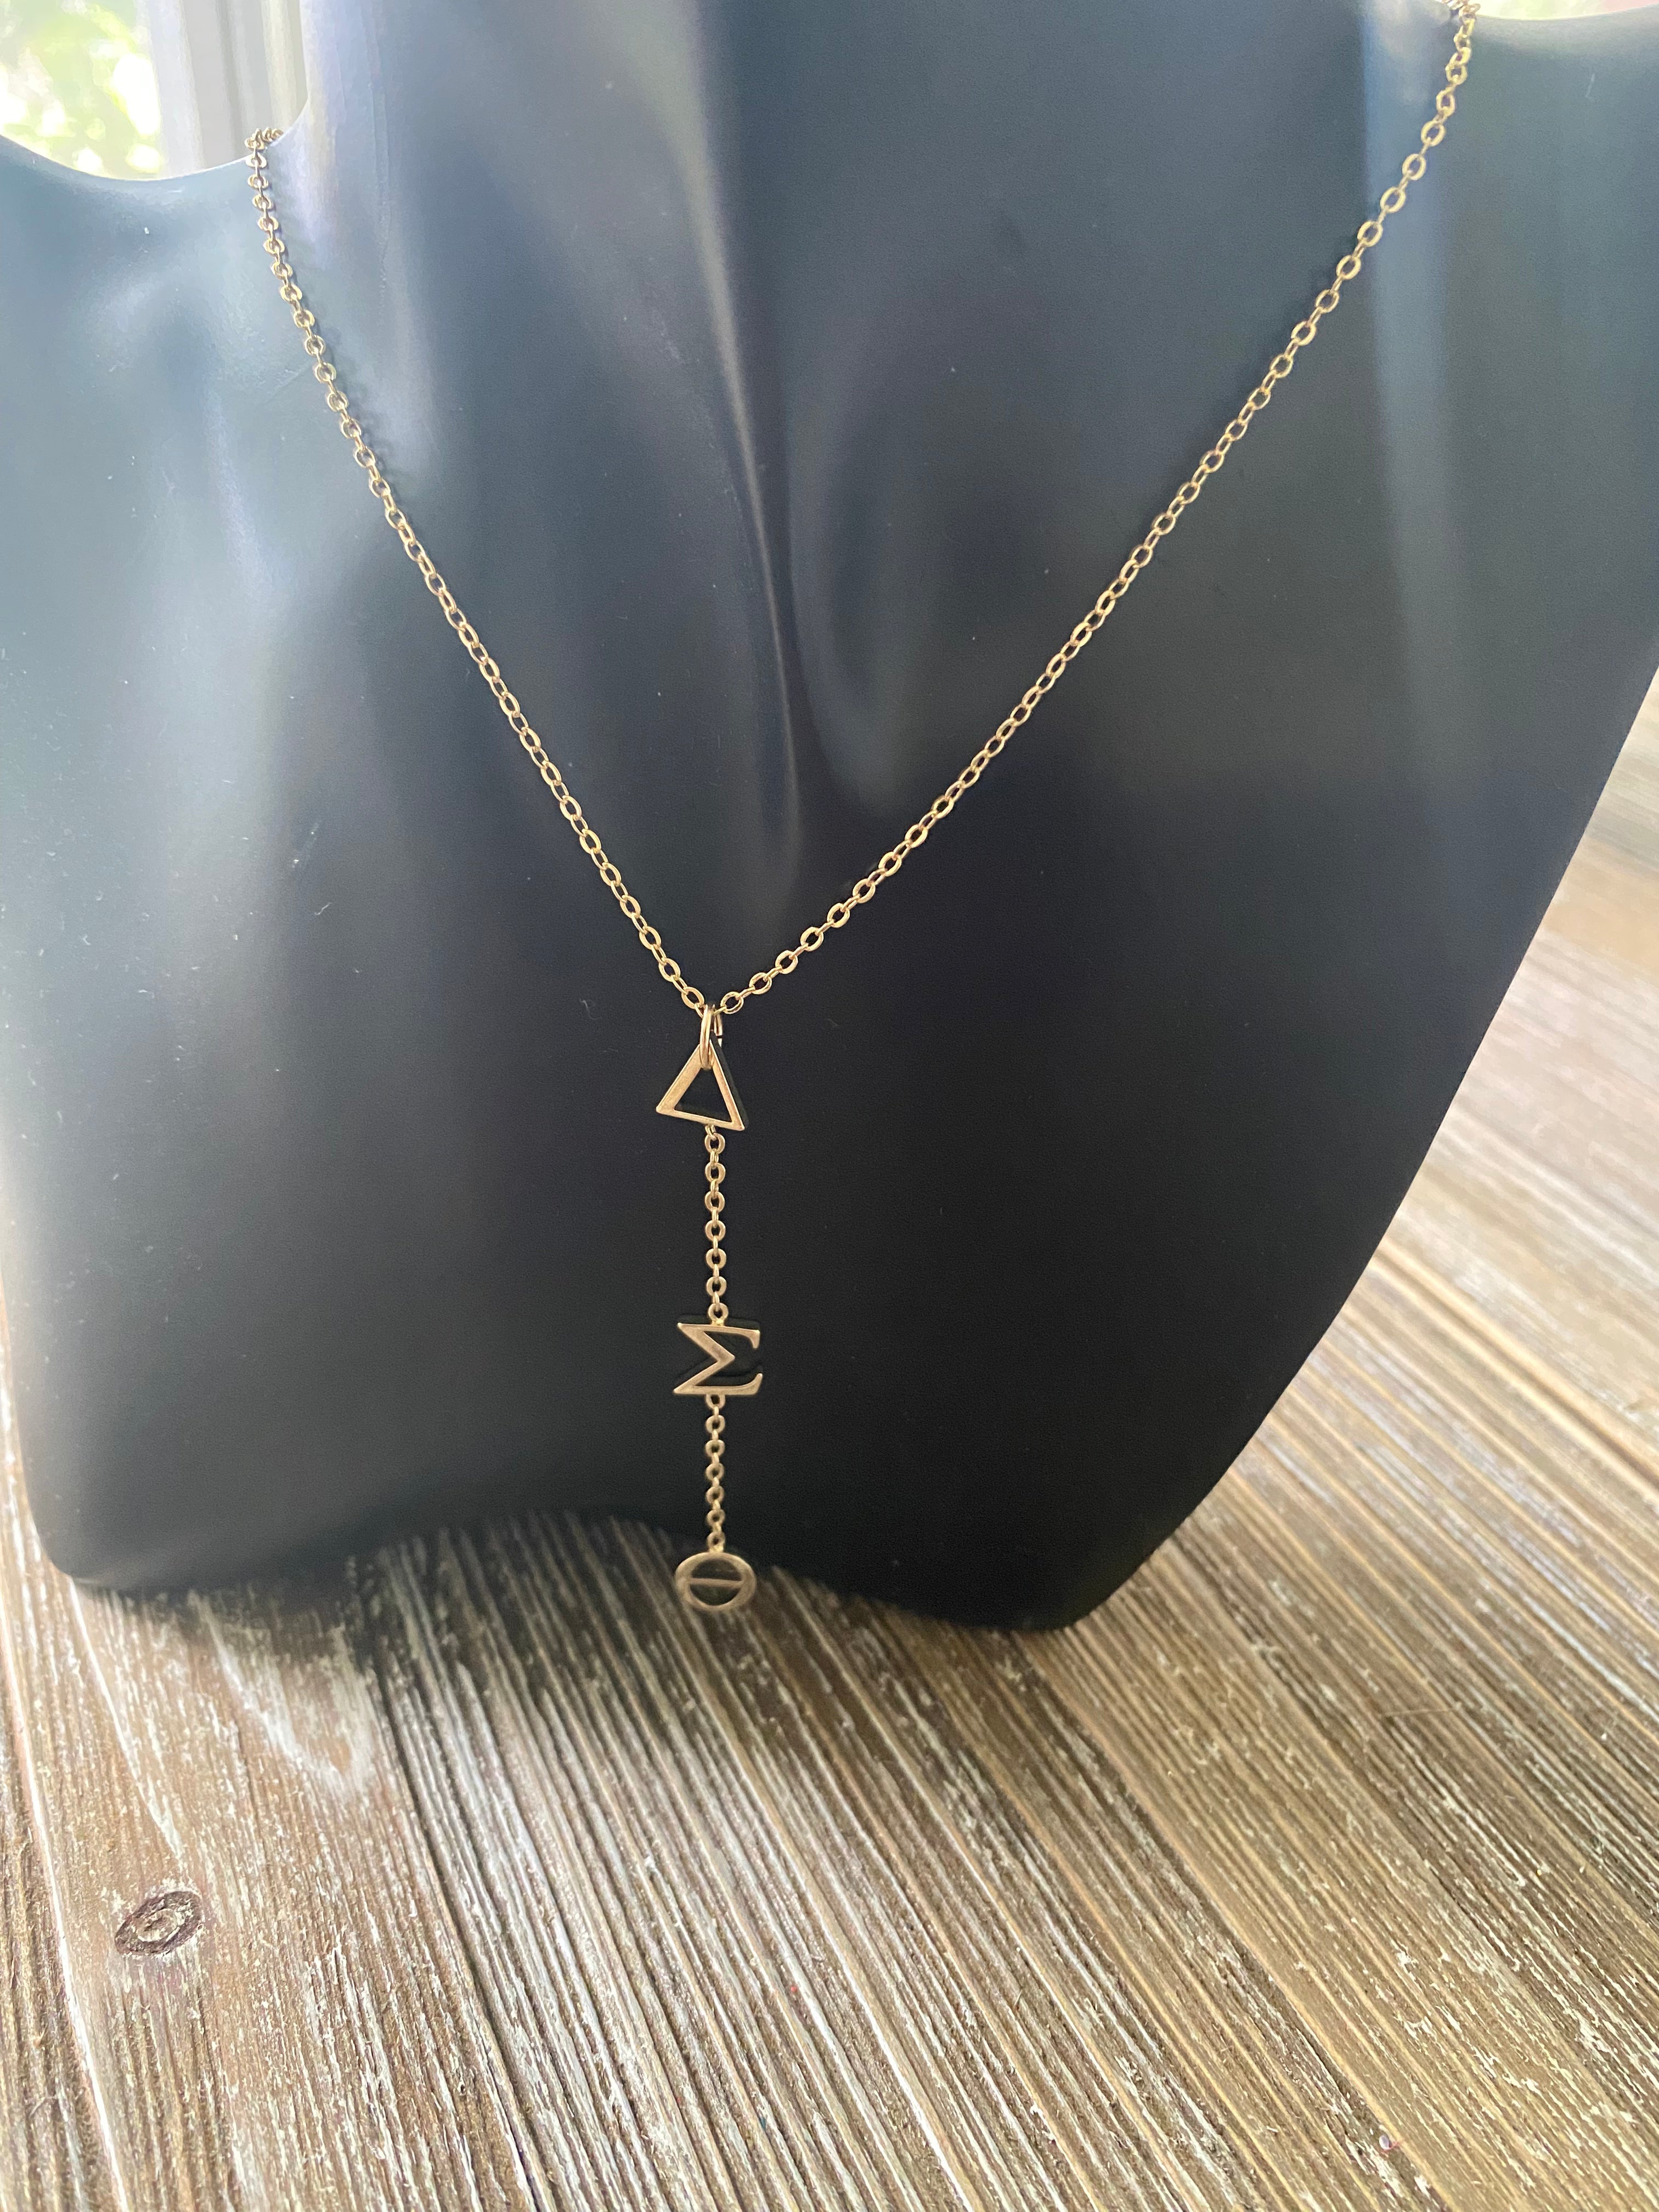 It's the DST for Me - Drop Necklace